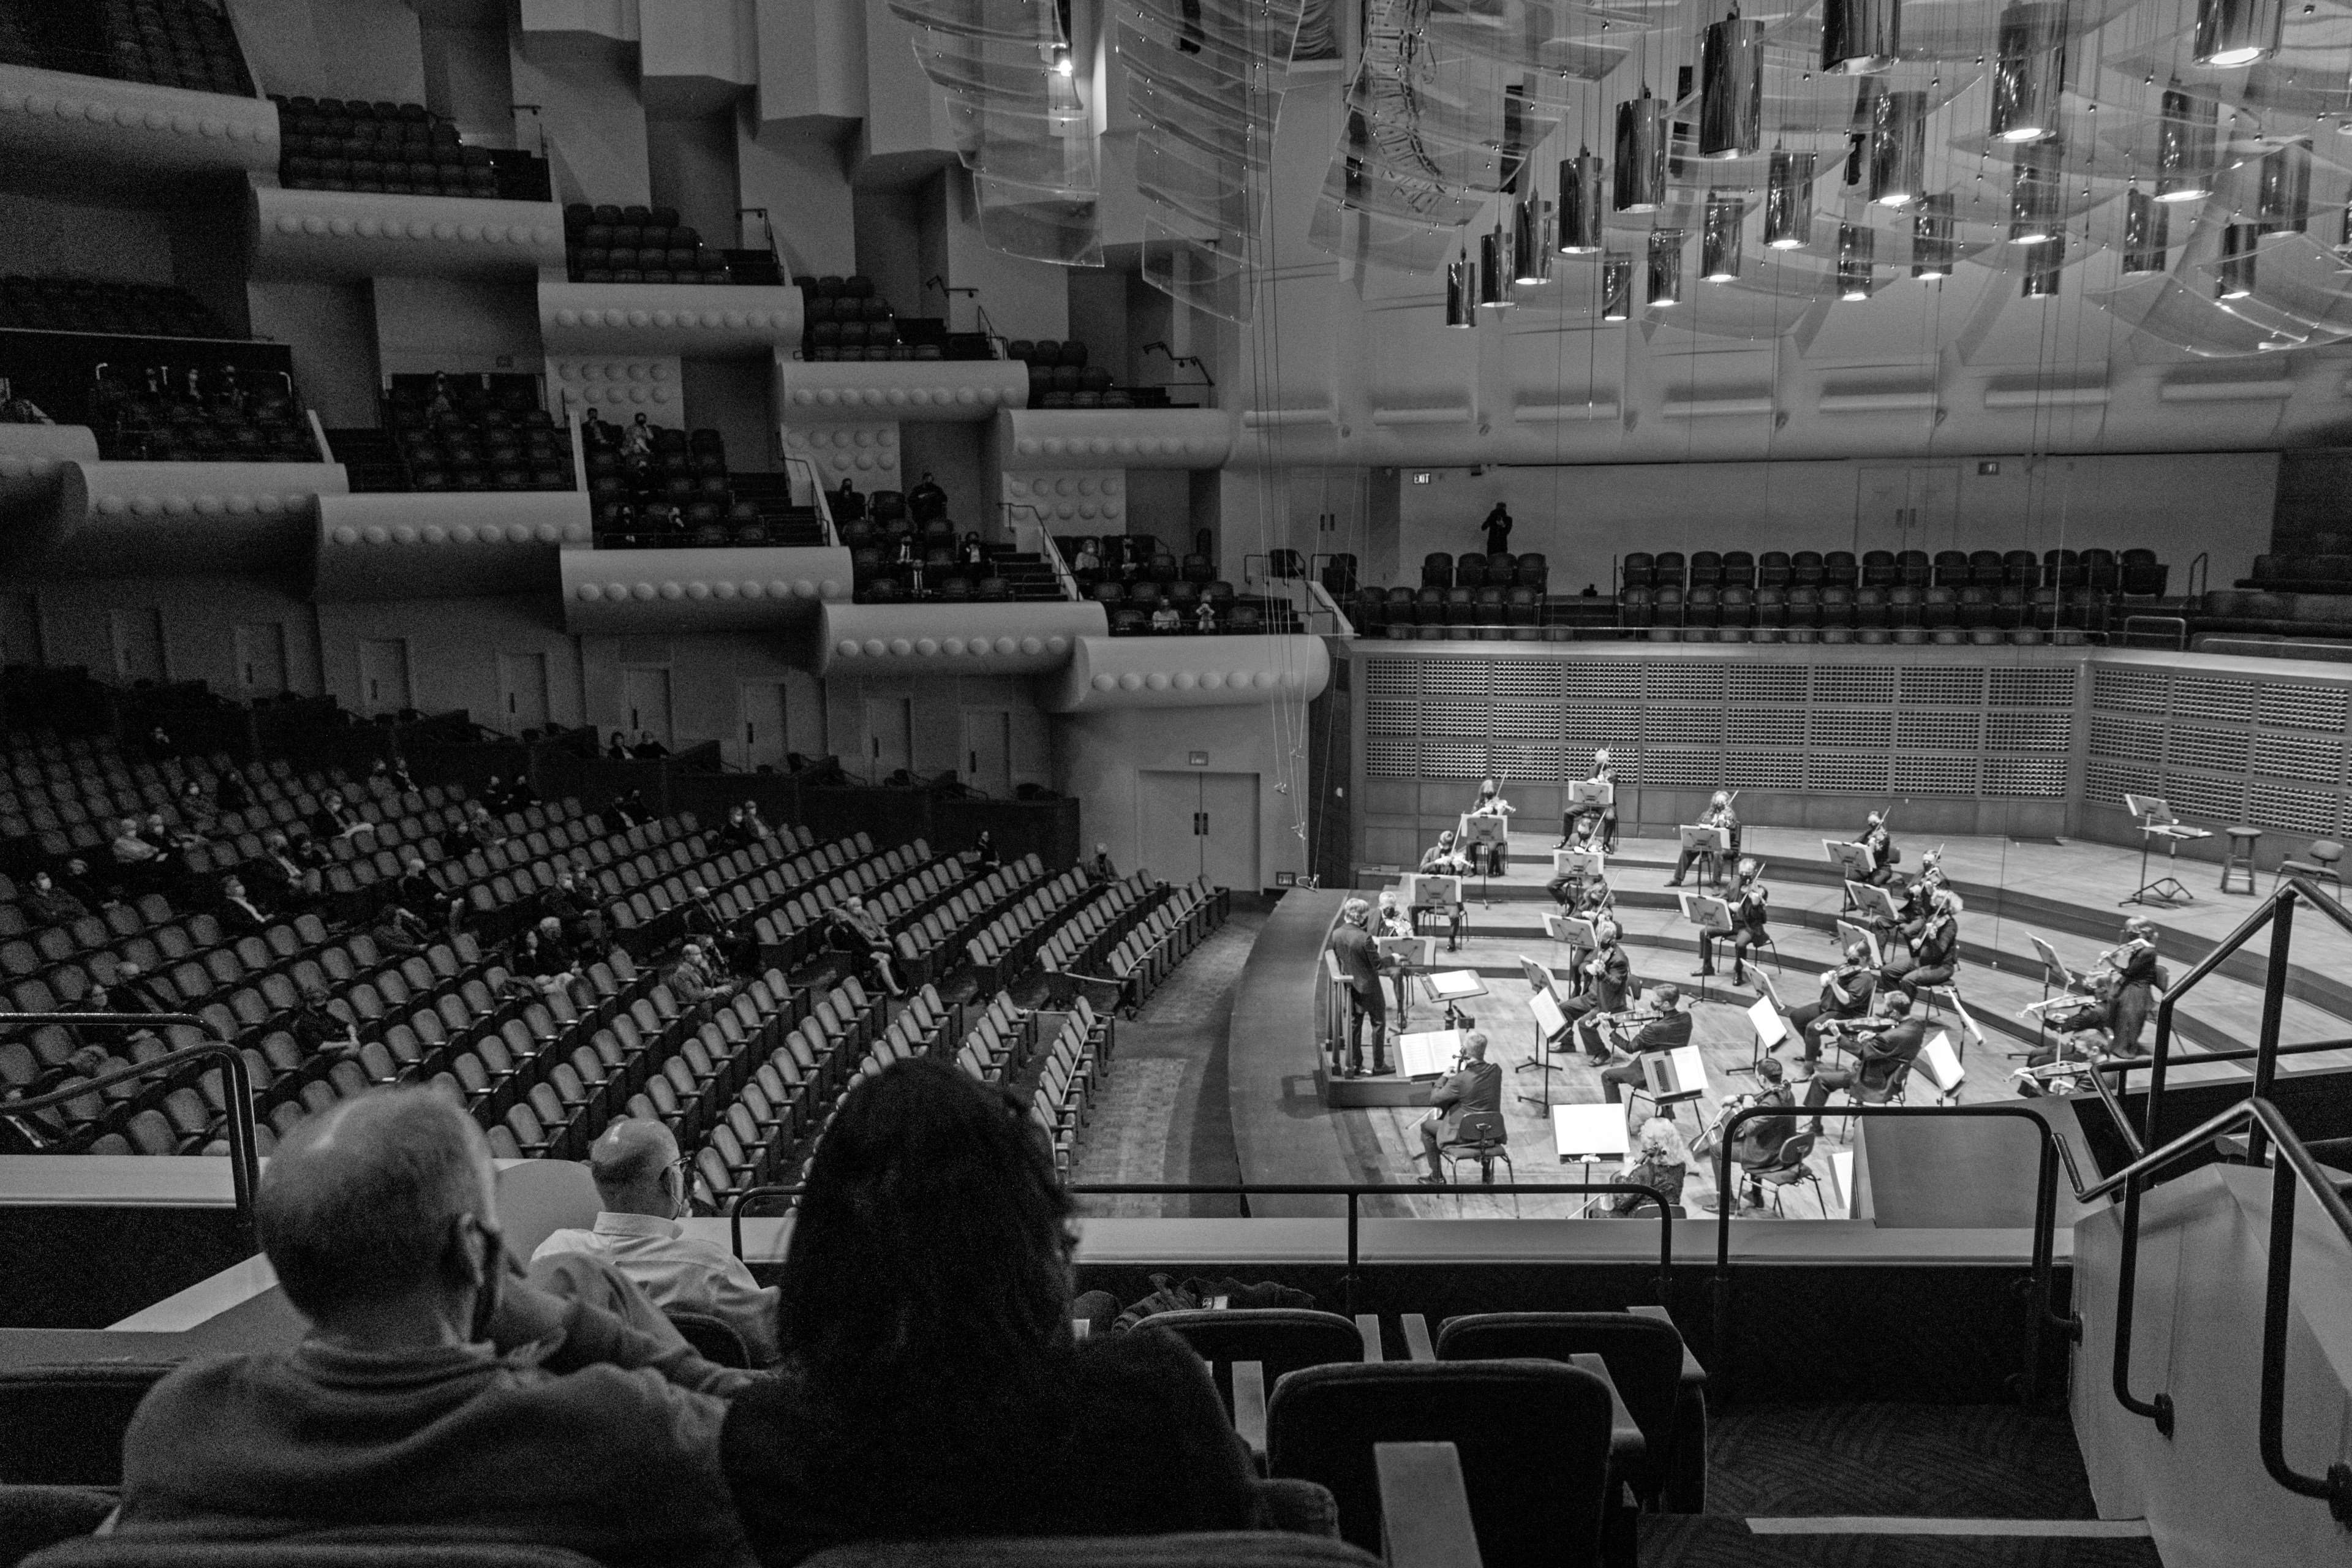 A black-and-white photo of a few audience members watching an orchestra play in a large, nearly empty modern concert hall.